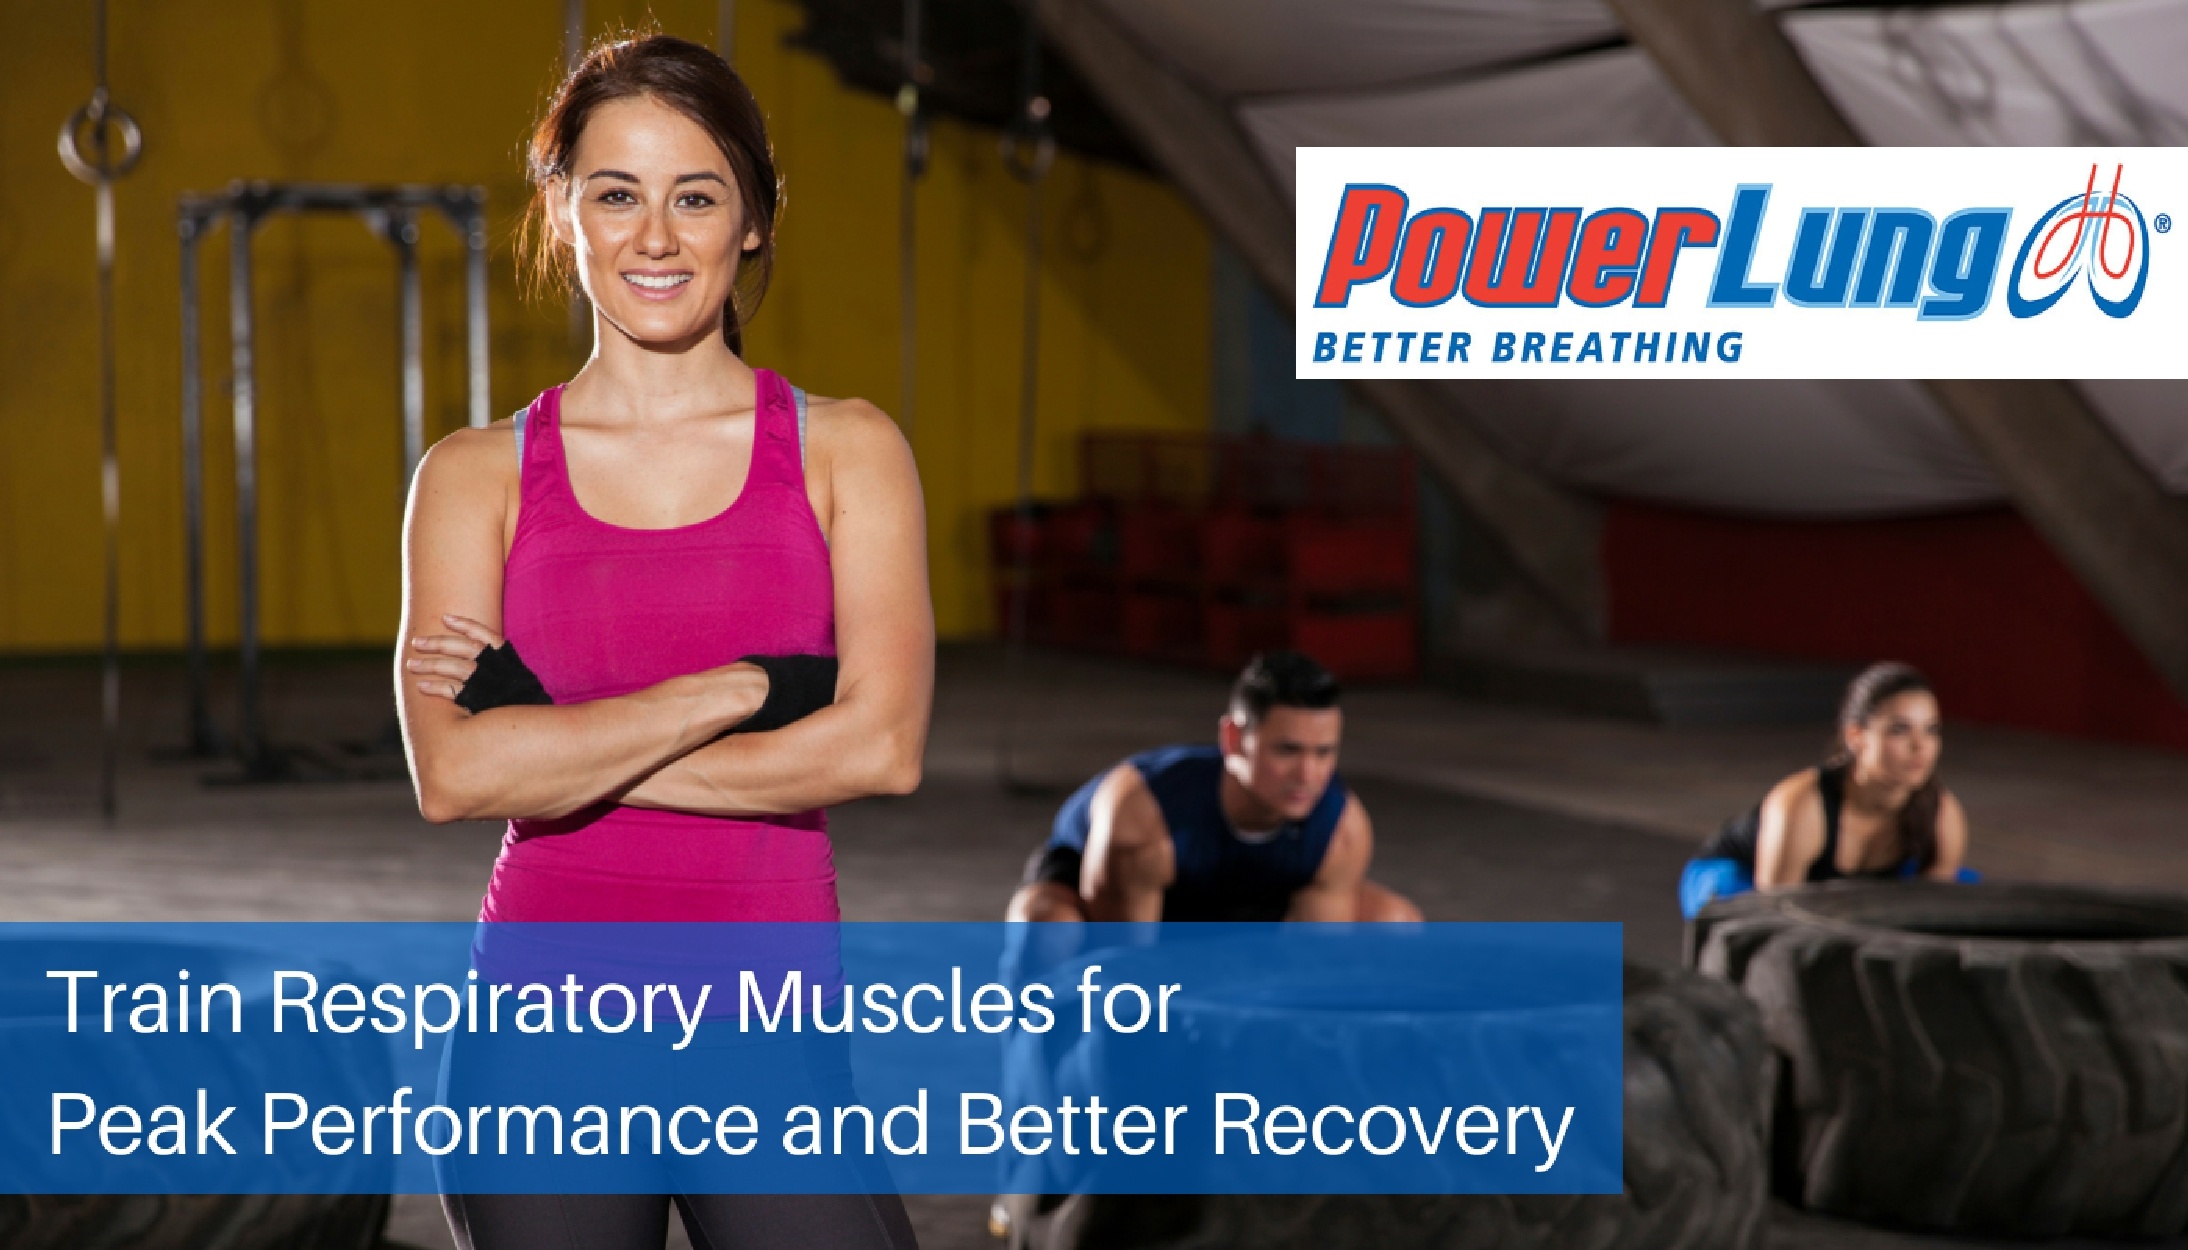 PowerLung - Train Respiratory Muscles for Peak Performance and Better Recovery.jpg